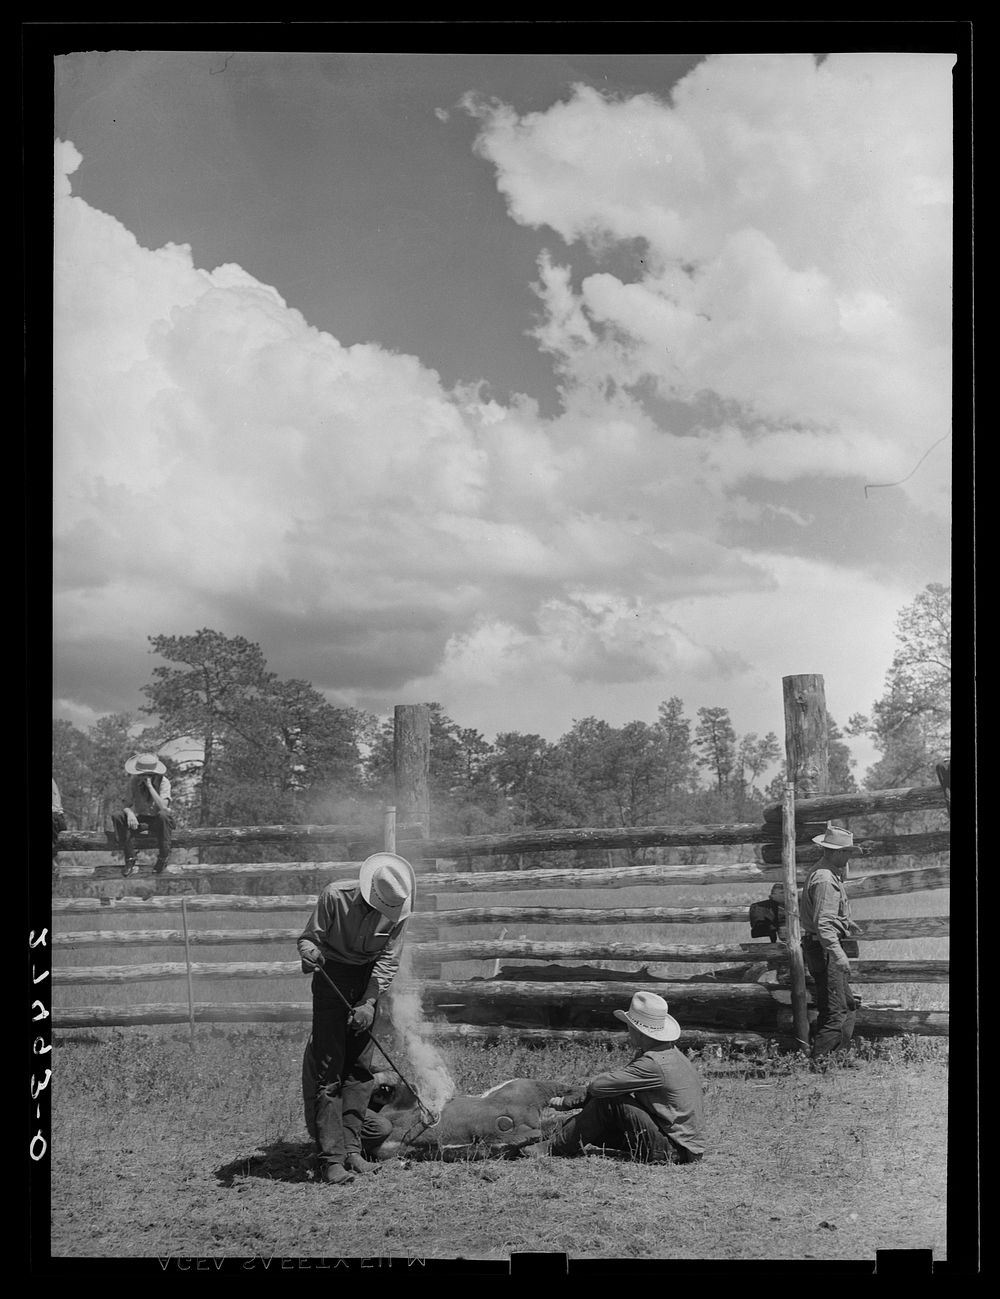 Breeding a calf. Three Circle Ranch roundup. Montana. Sourced from the Library of Congress.